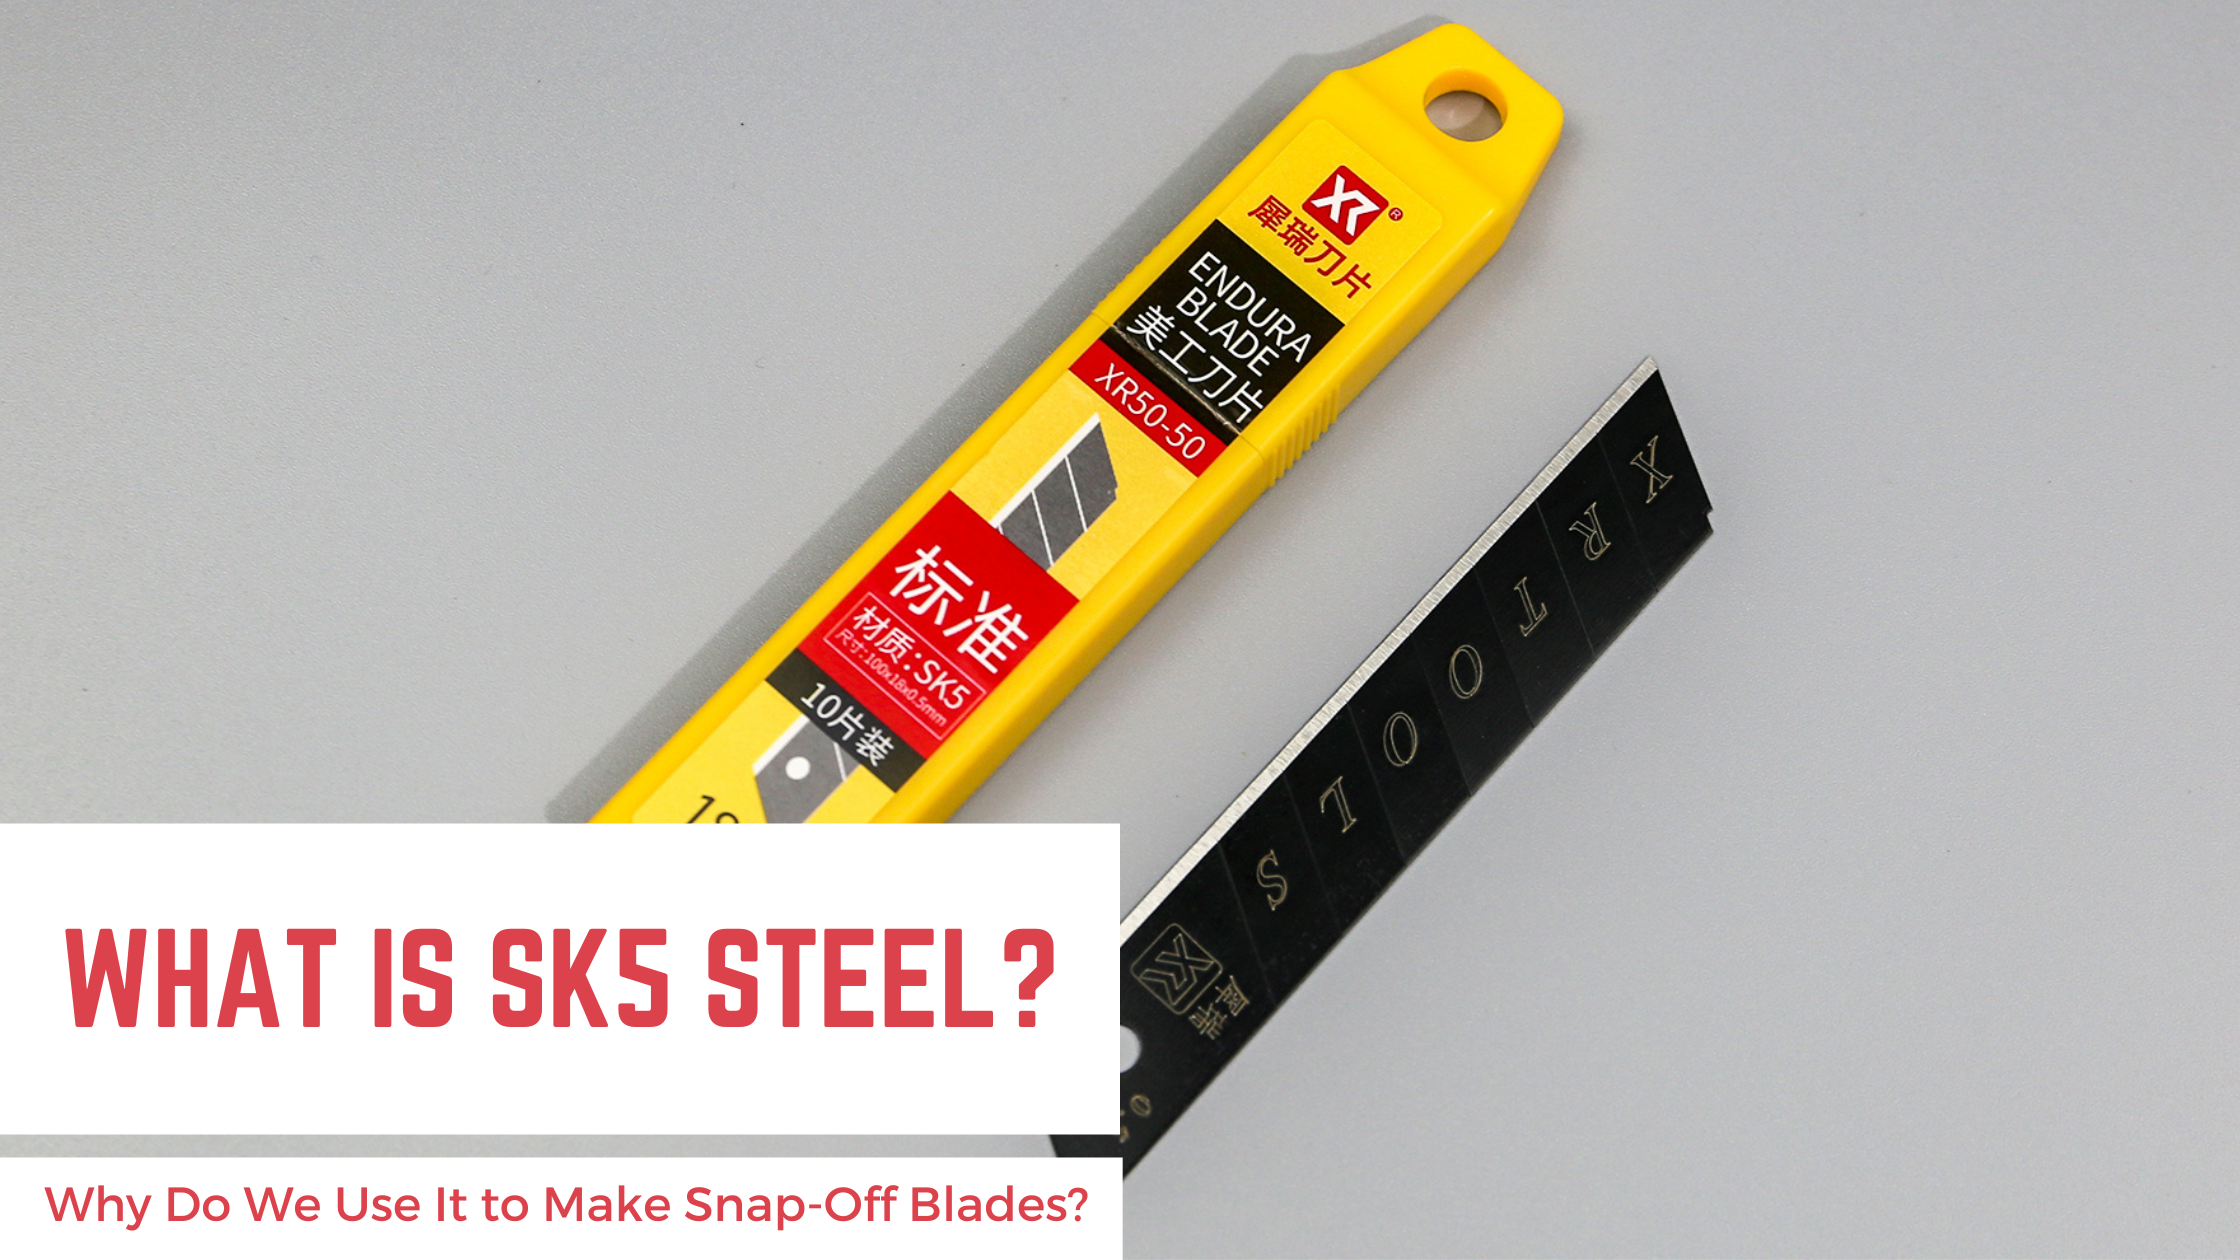 What Is SK5 Steel? Why Do We Use It to Make Snap-Off Blades?